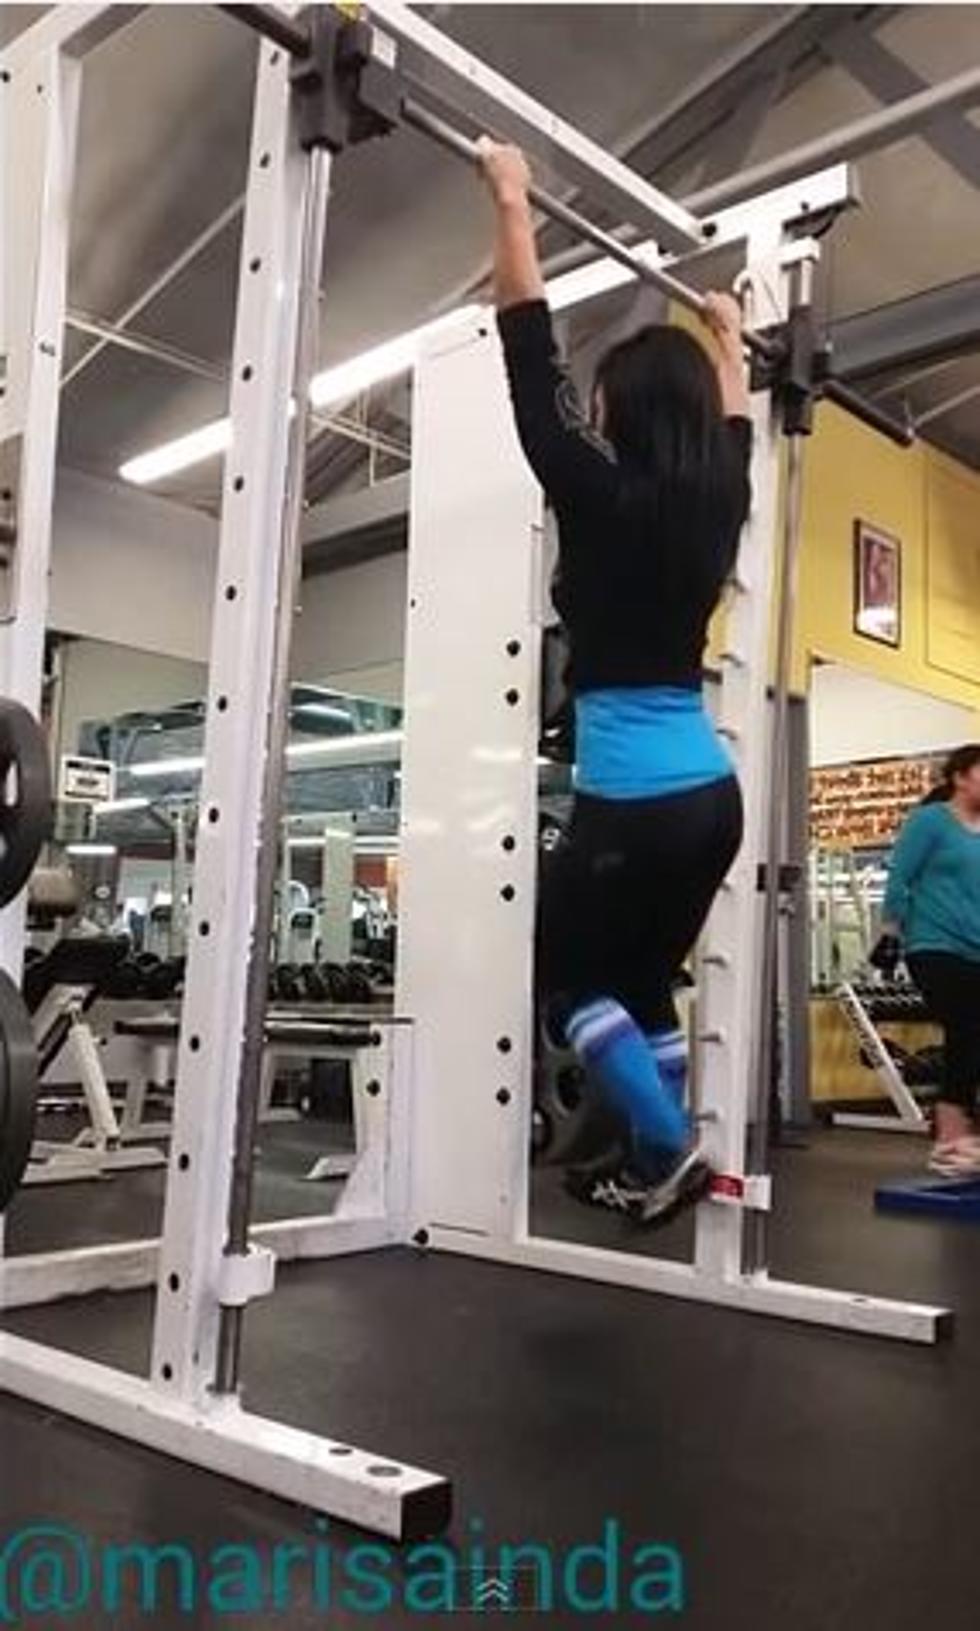 Girl Has Amazing Dance Moves on Pull Up Bar at Gym [VIDEO]